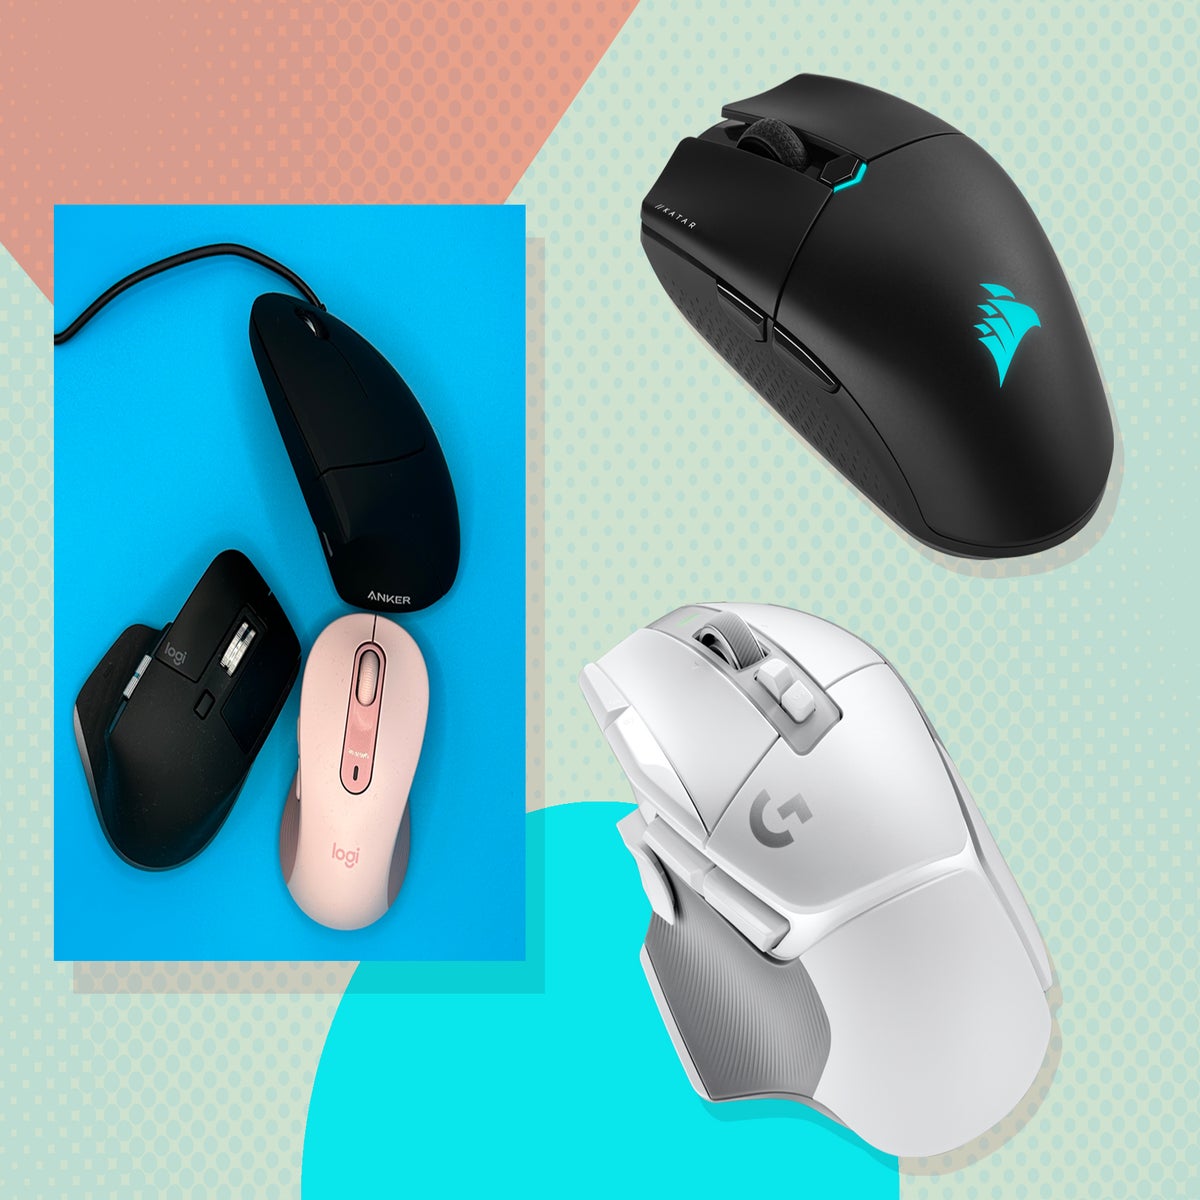 Are wireless or wired mice best for gaming?